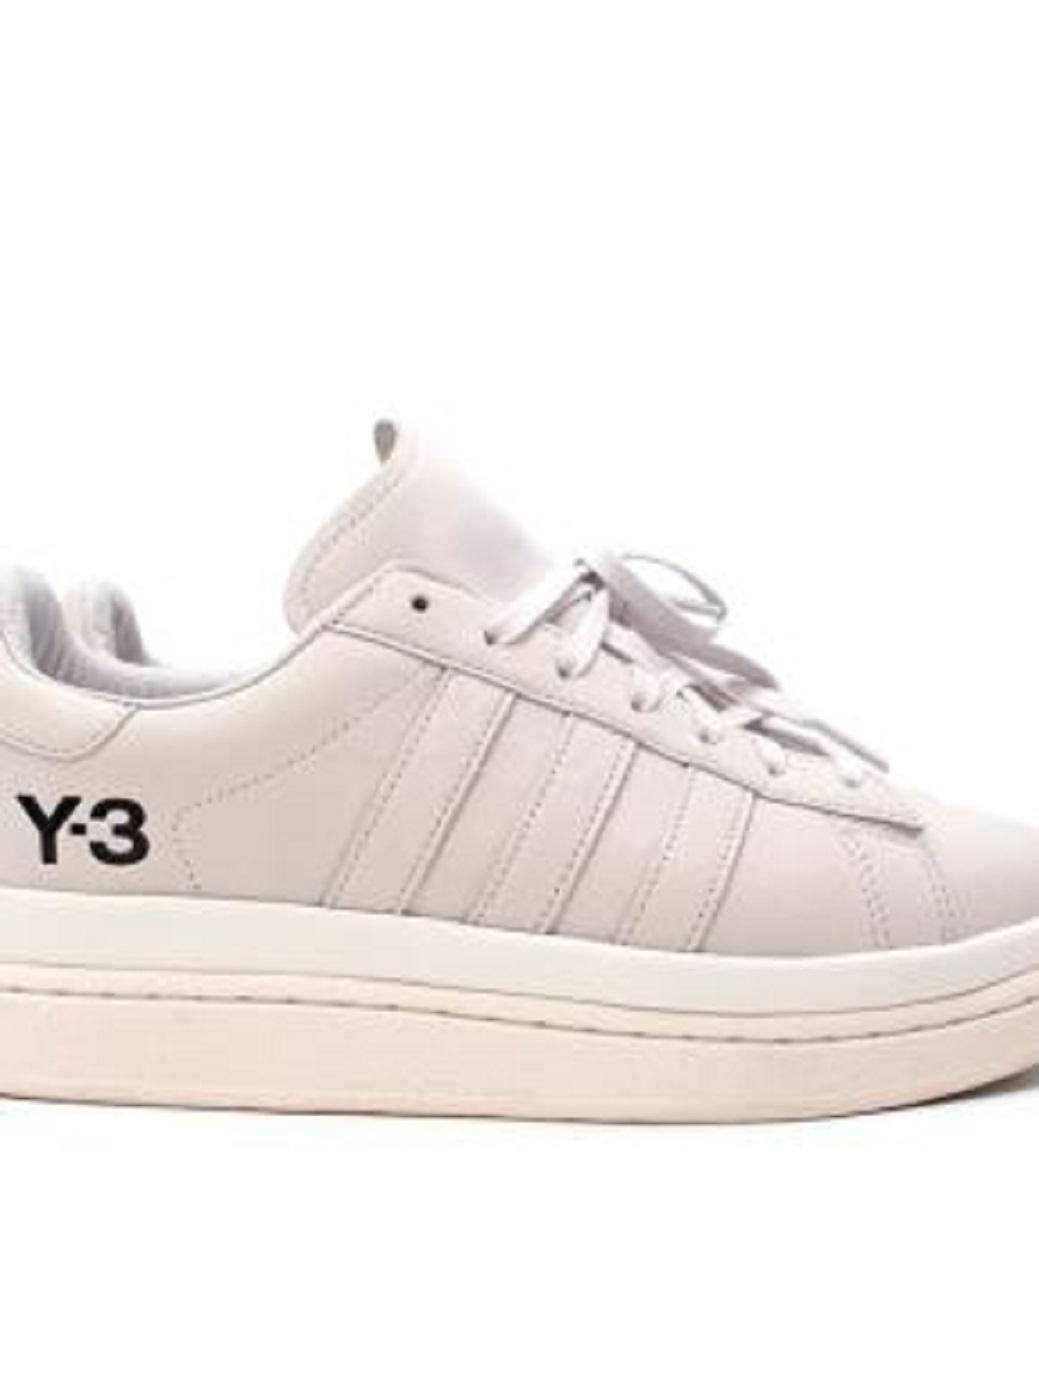 Y-3 Putty Hicho Leather Low Top Sneakers 

- Round toe, thick putty-coloured leather upper, sat atop a thick rubber platform outsole
- Embossed Y-3 logo
-Lace up front closure 


Materials 
100% Leather 
100% Rubber 

Made in China 

PLEASE NOTE,